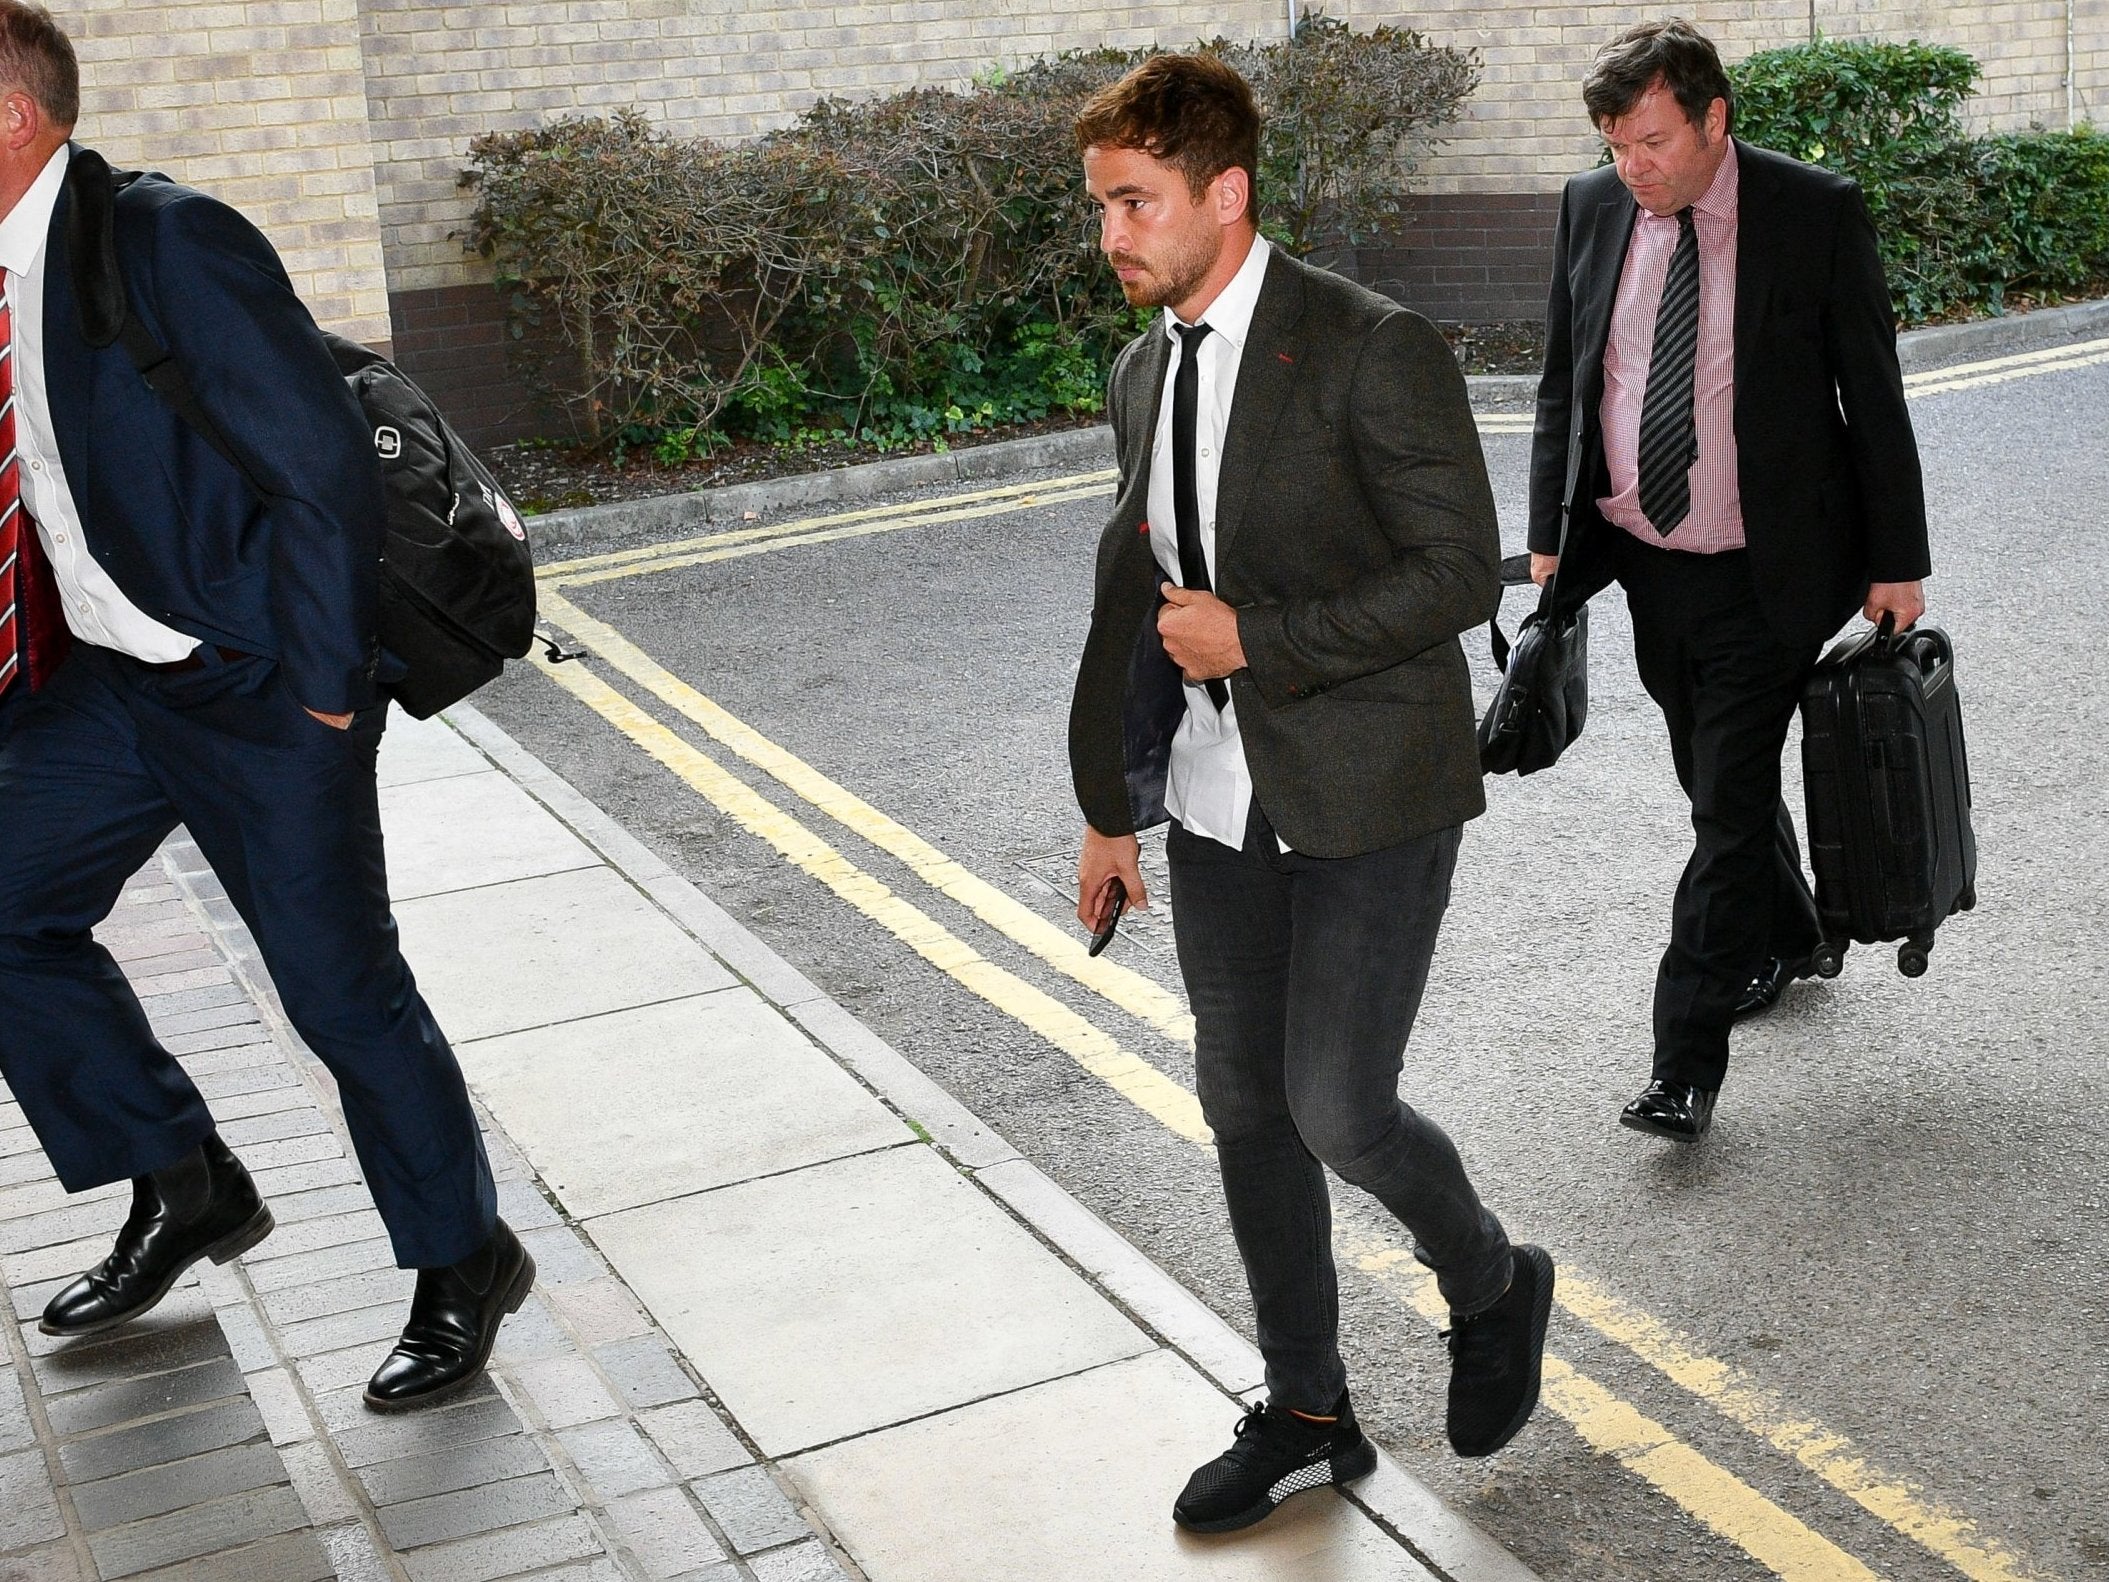 Danny Cipriani was found guilty of misconduct by the RFU late on Wednesday night